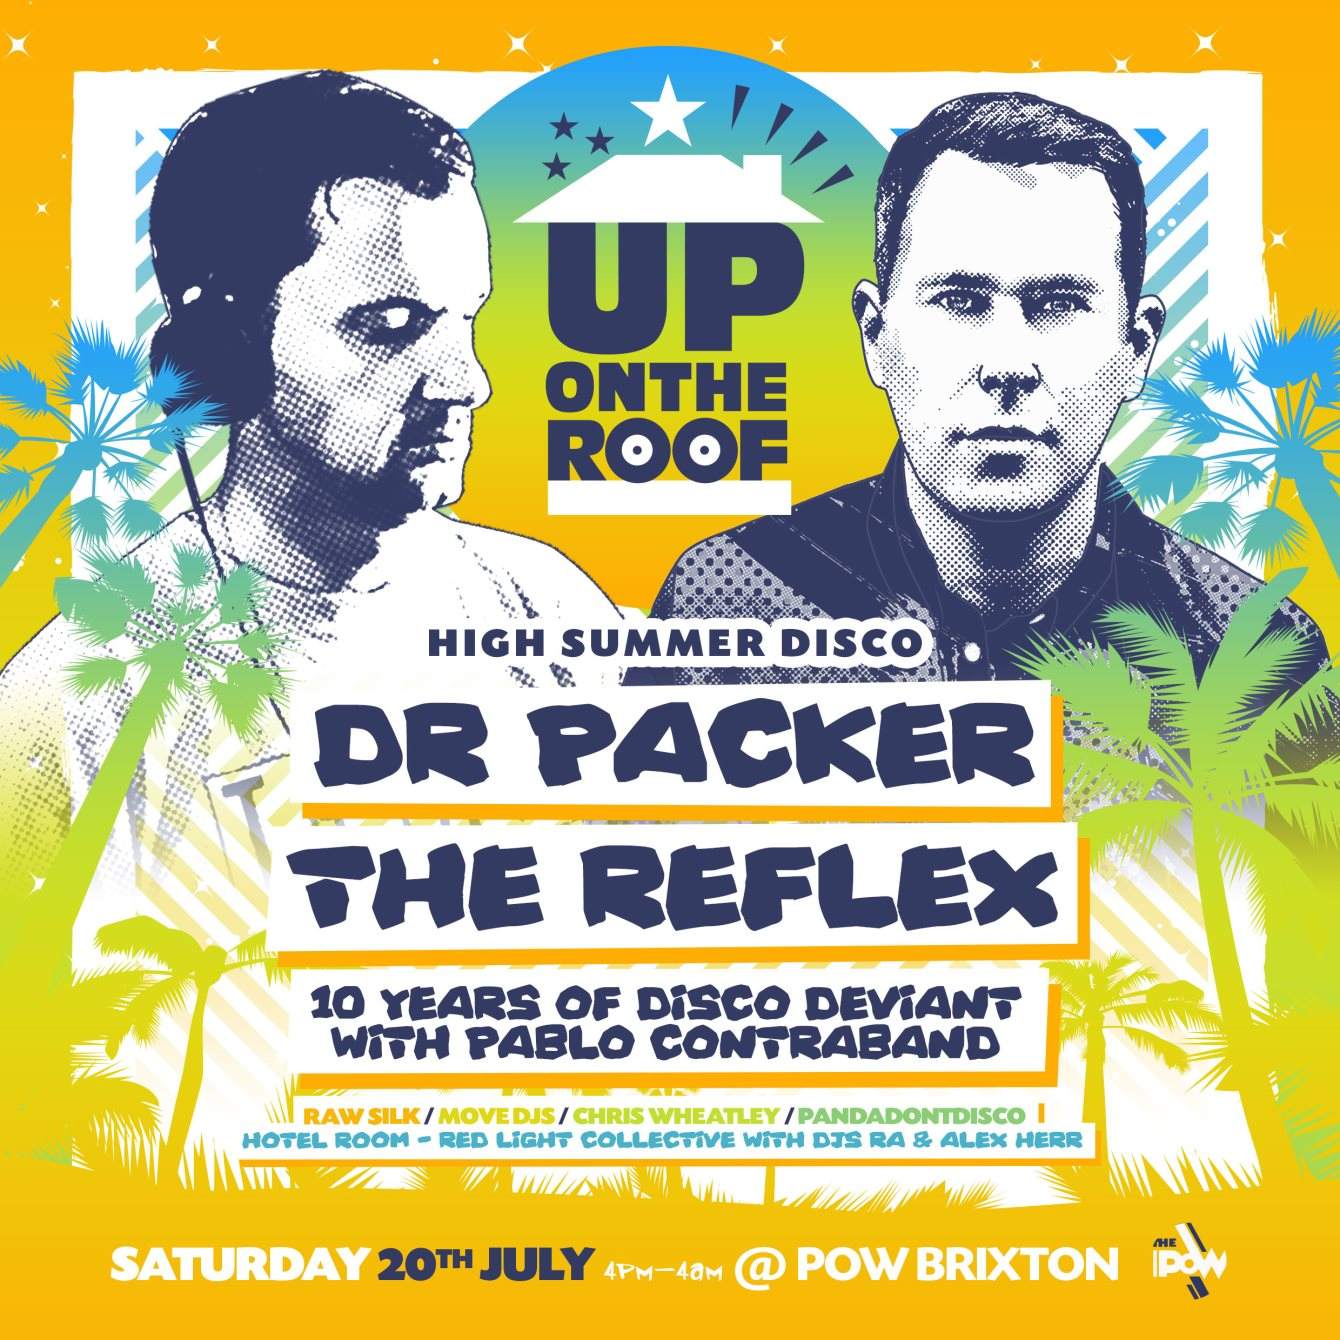 Up On The Roof's High Summer Disco with Dr Packer, The Reflex & 10 Years of Disco Deviant - フライヤー表